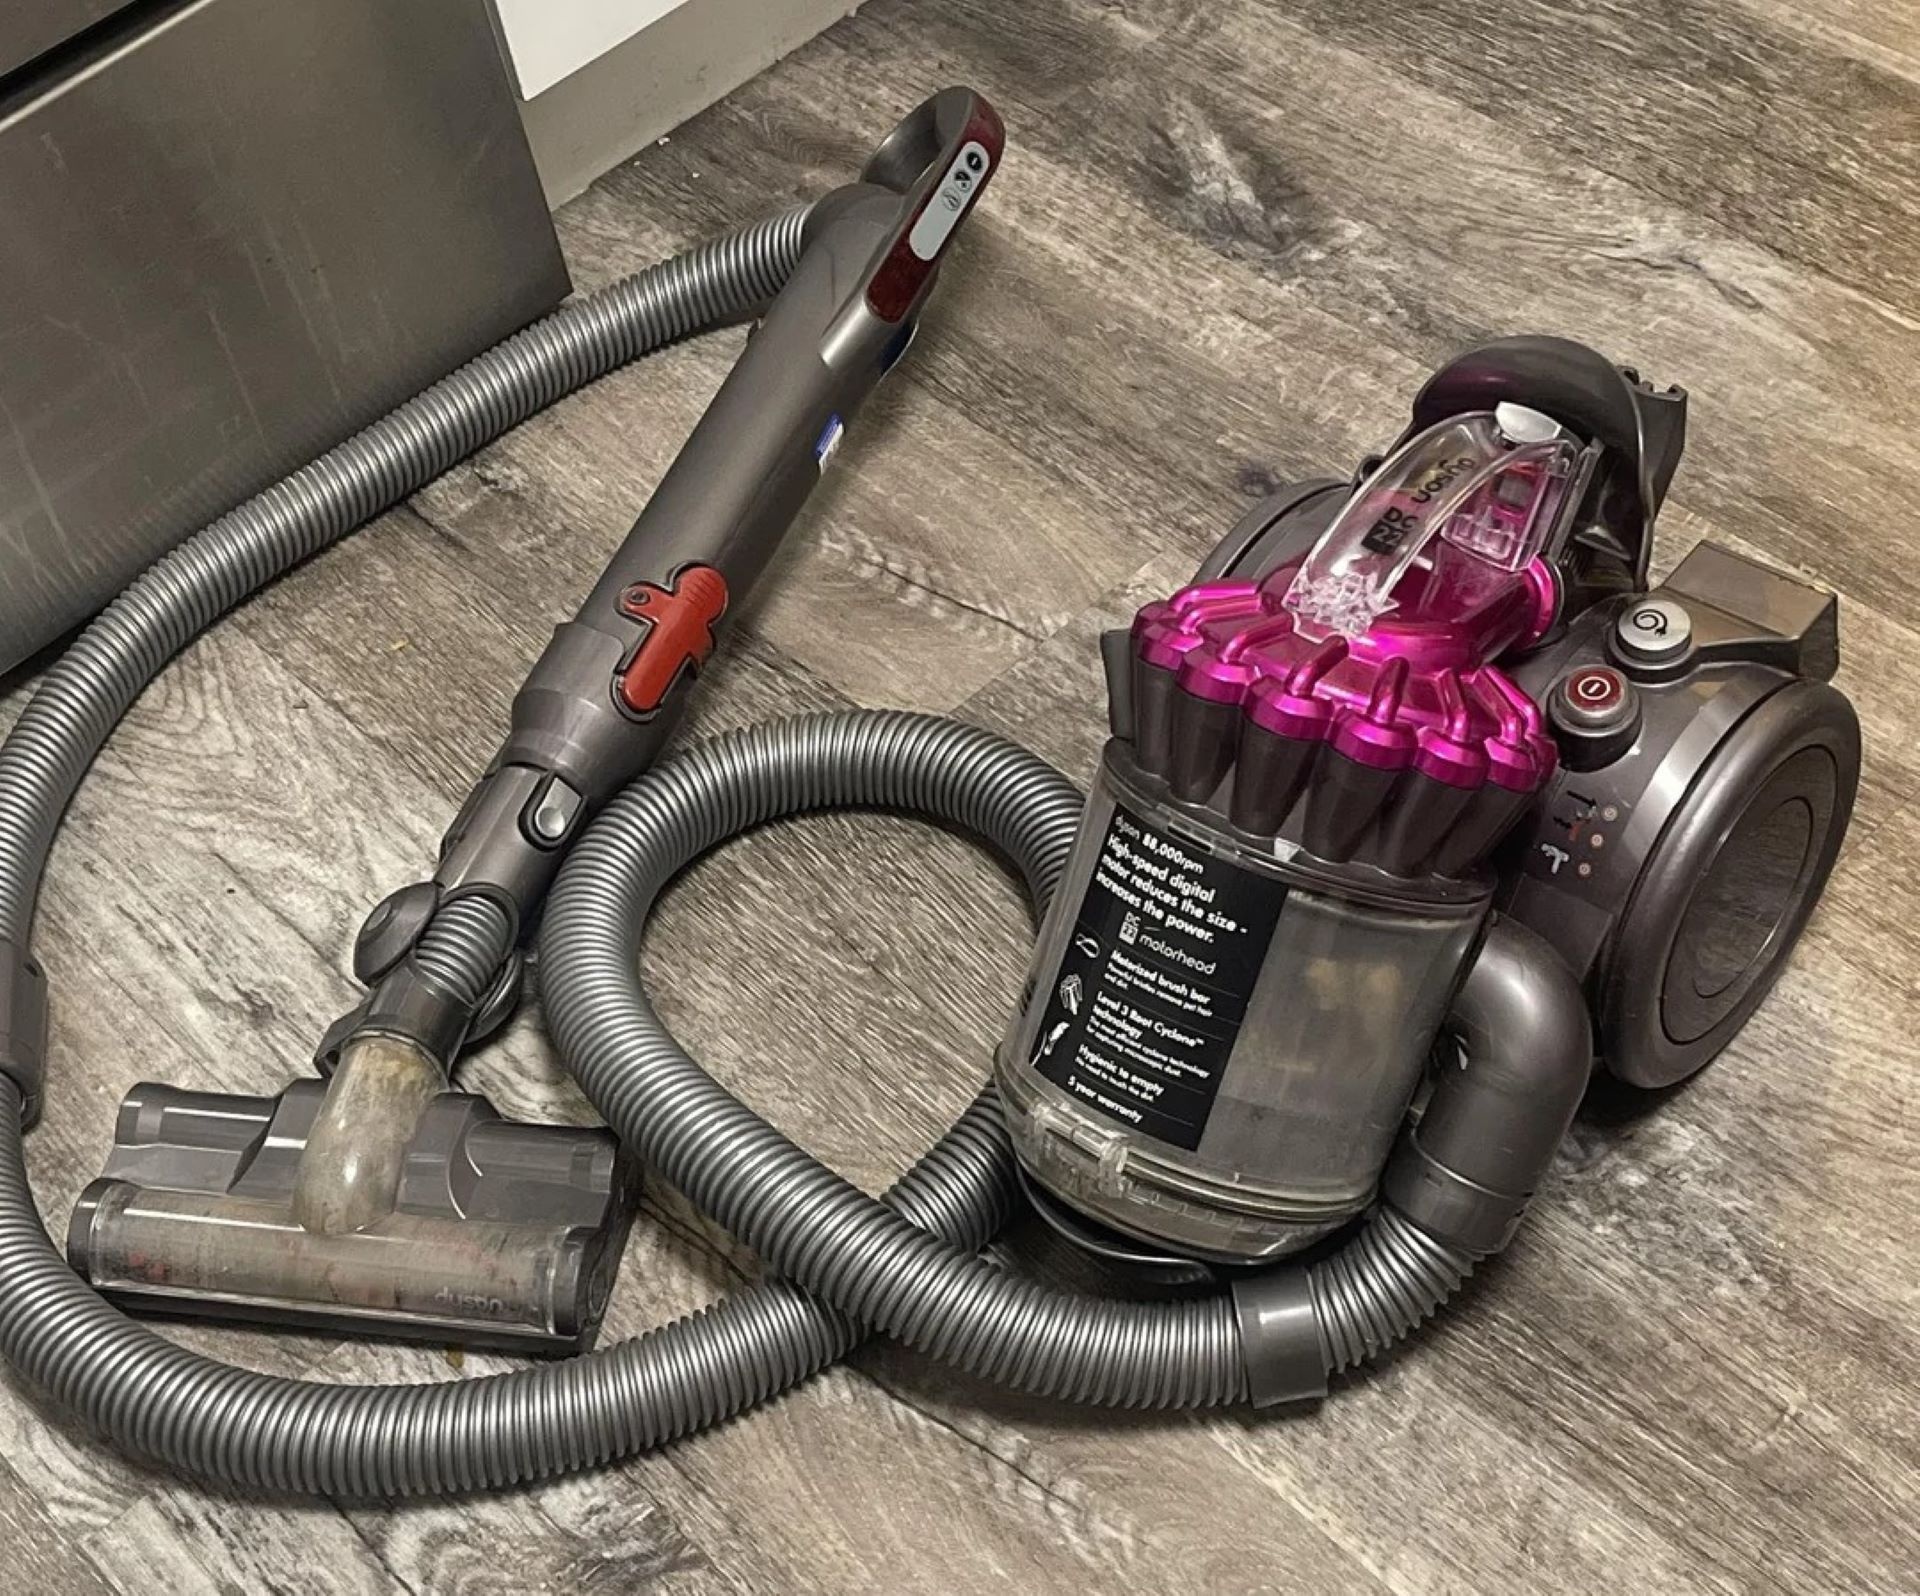 This lucky thrifter found a Dyson vacuum for $40